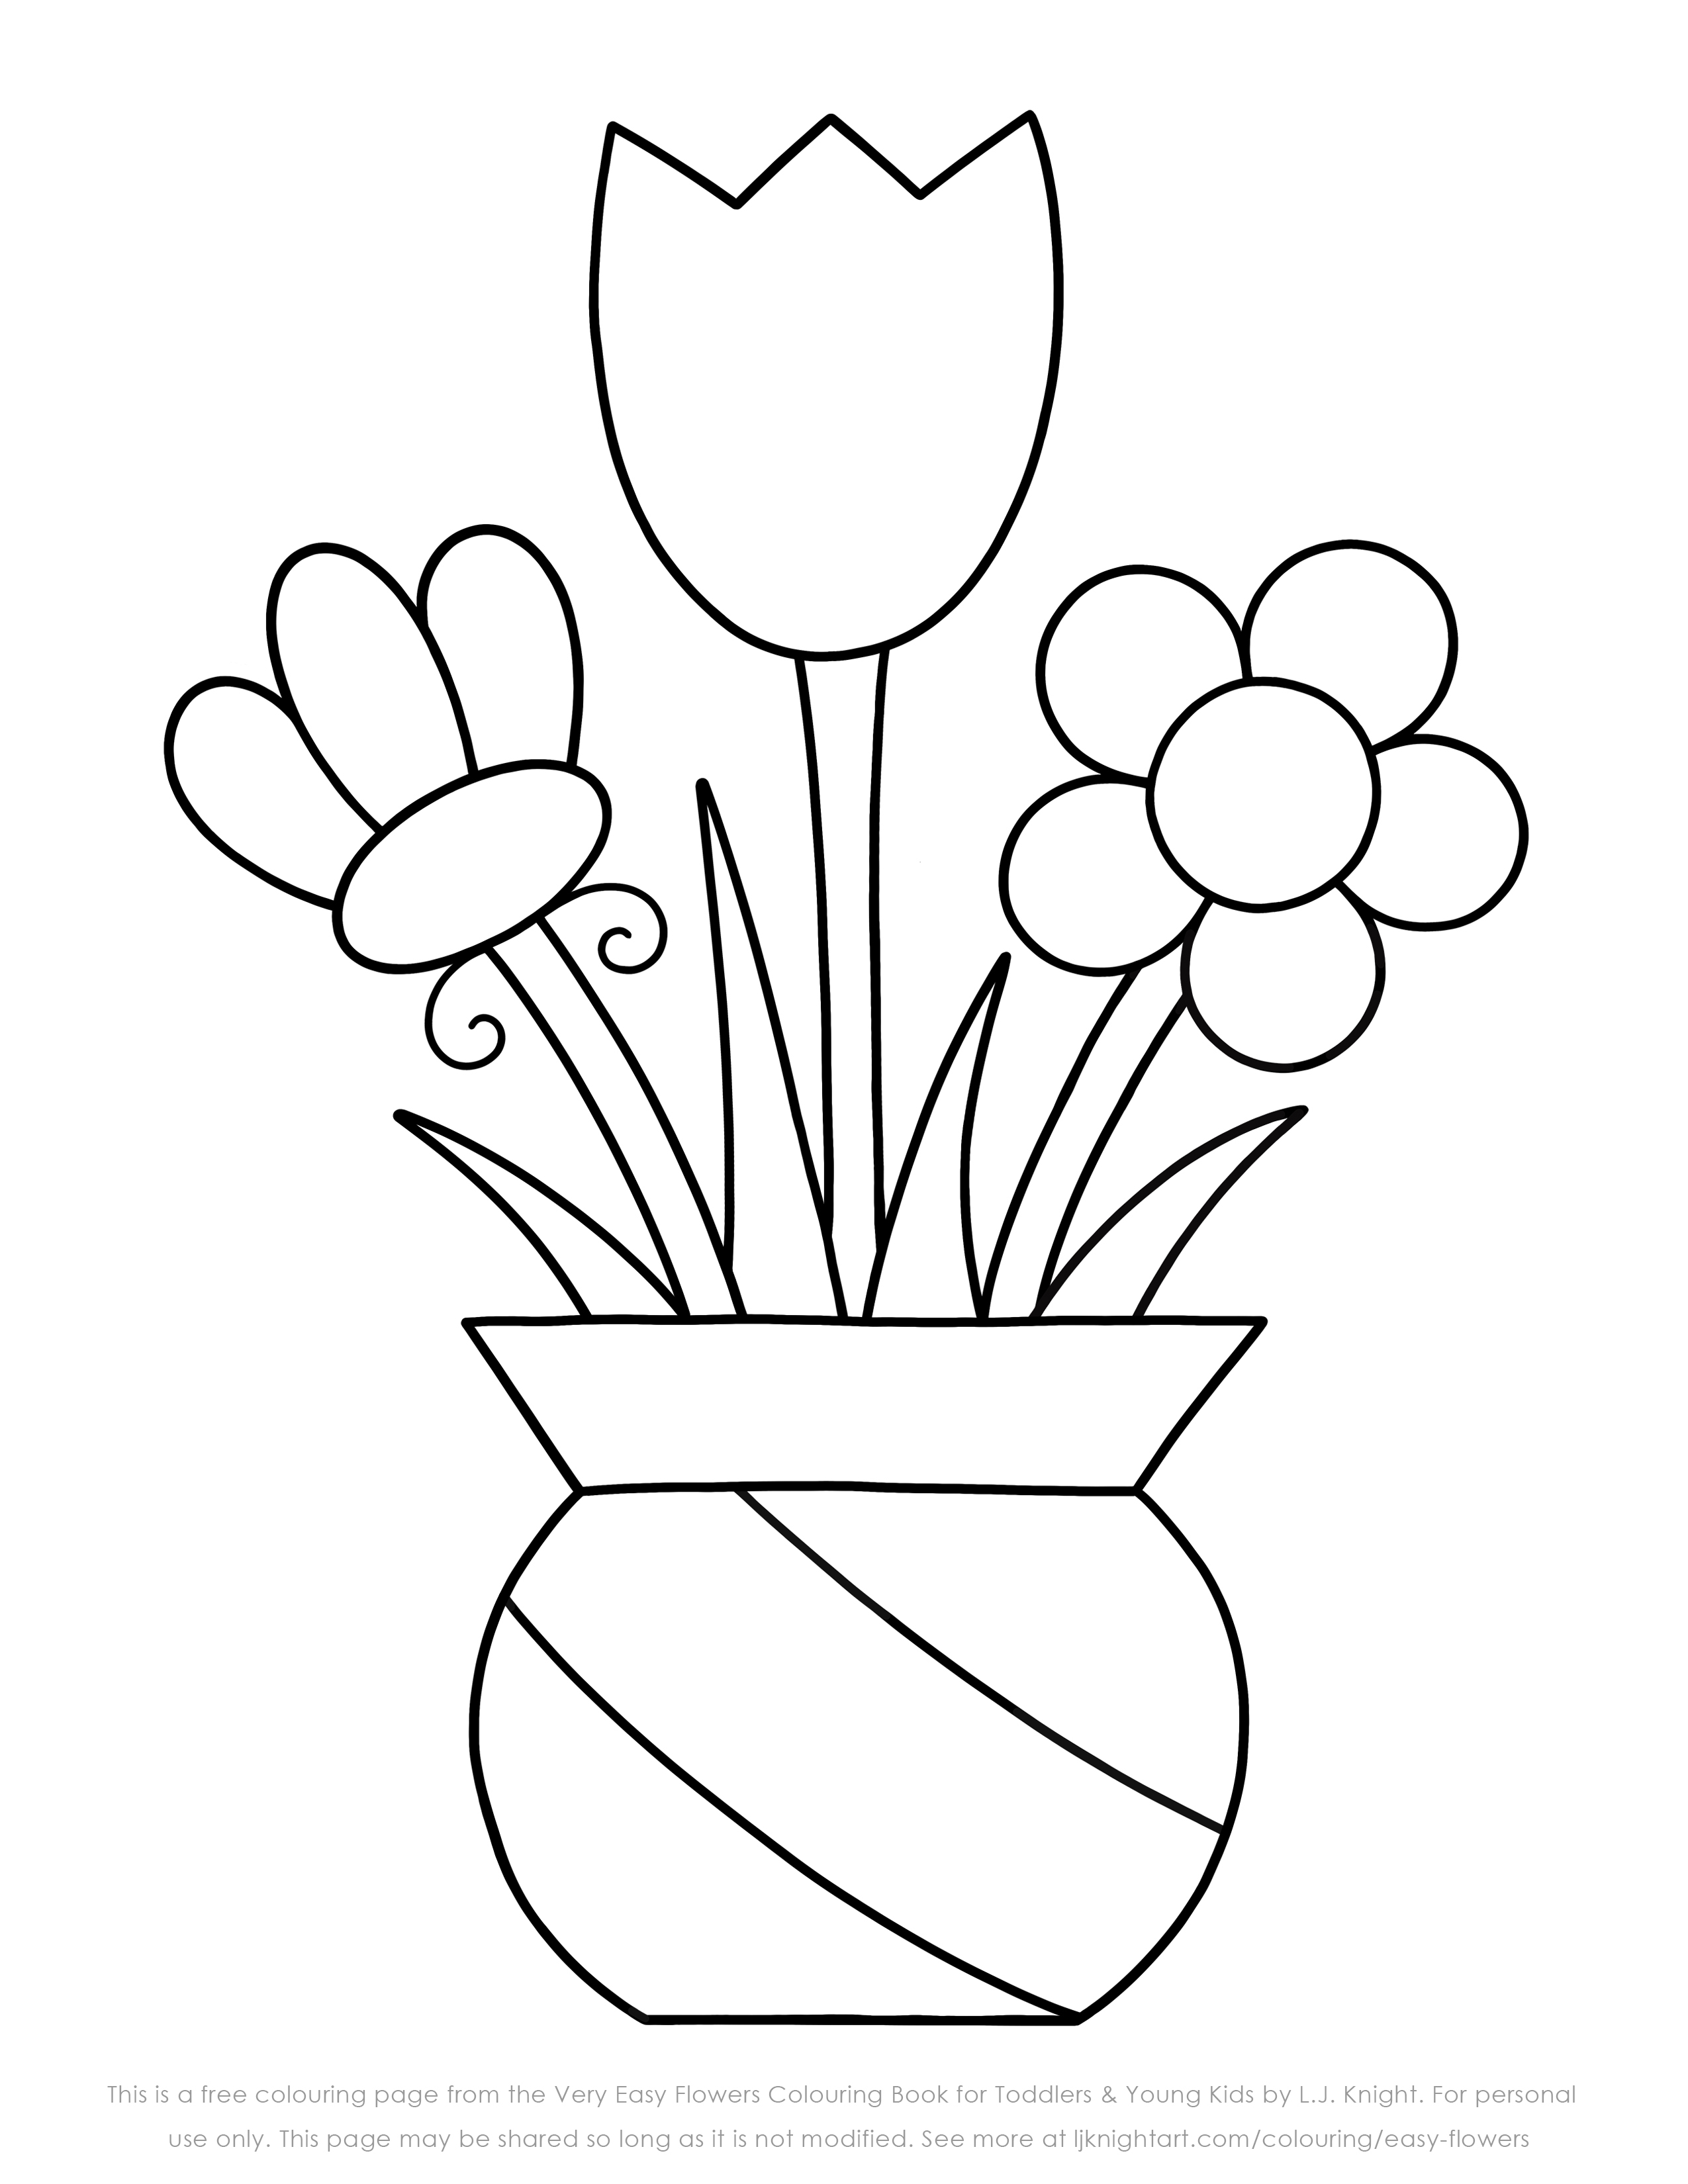 Big Coloring Book Of Large Print Flowers: Coloring Sheets For